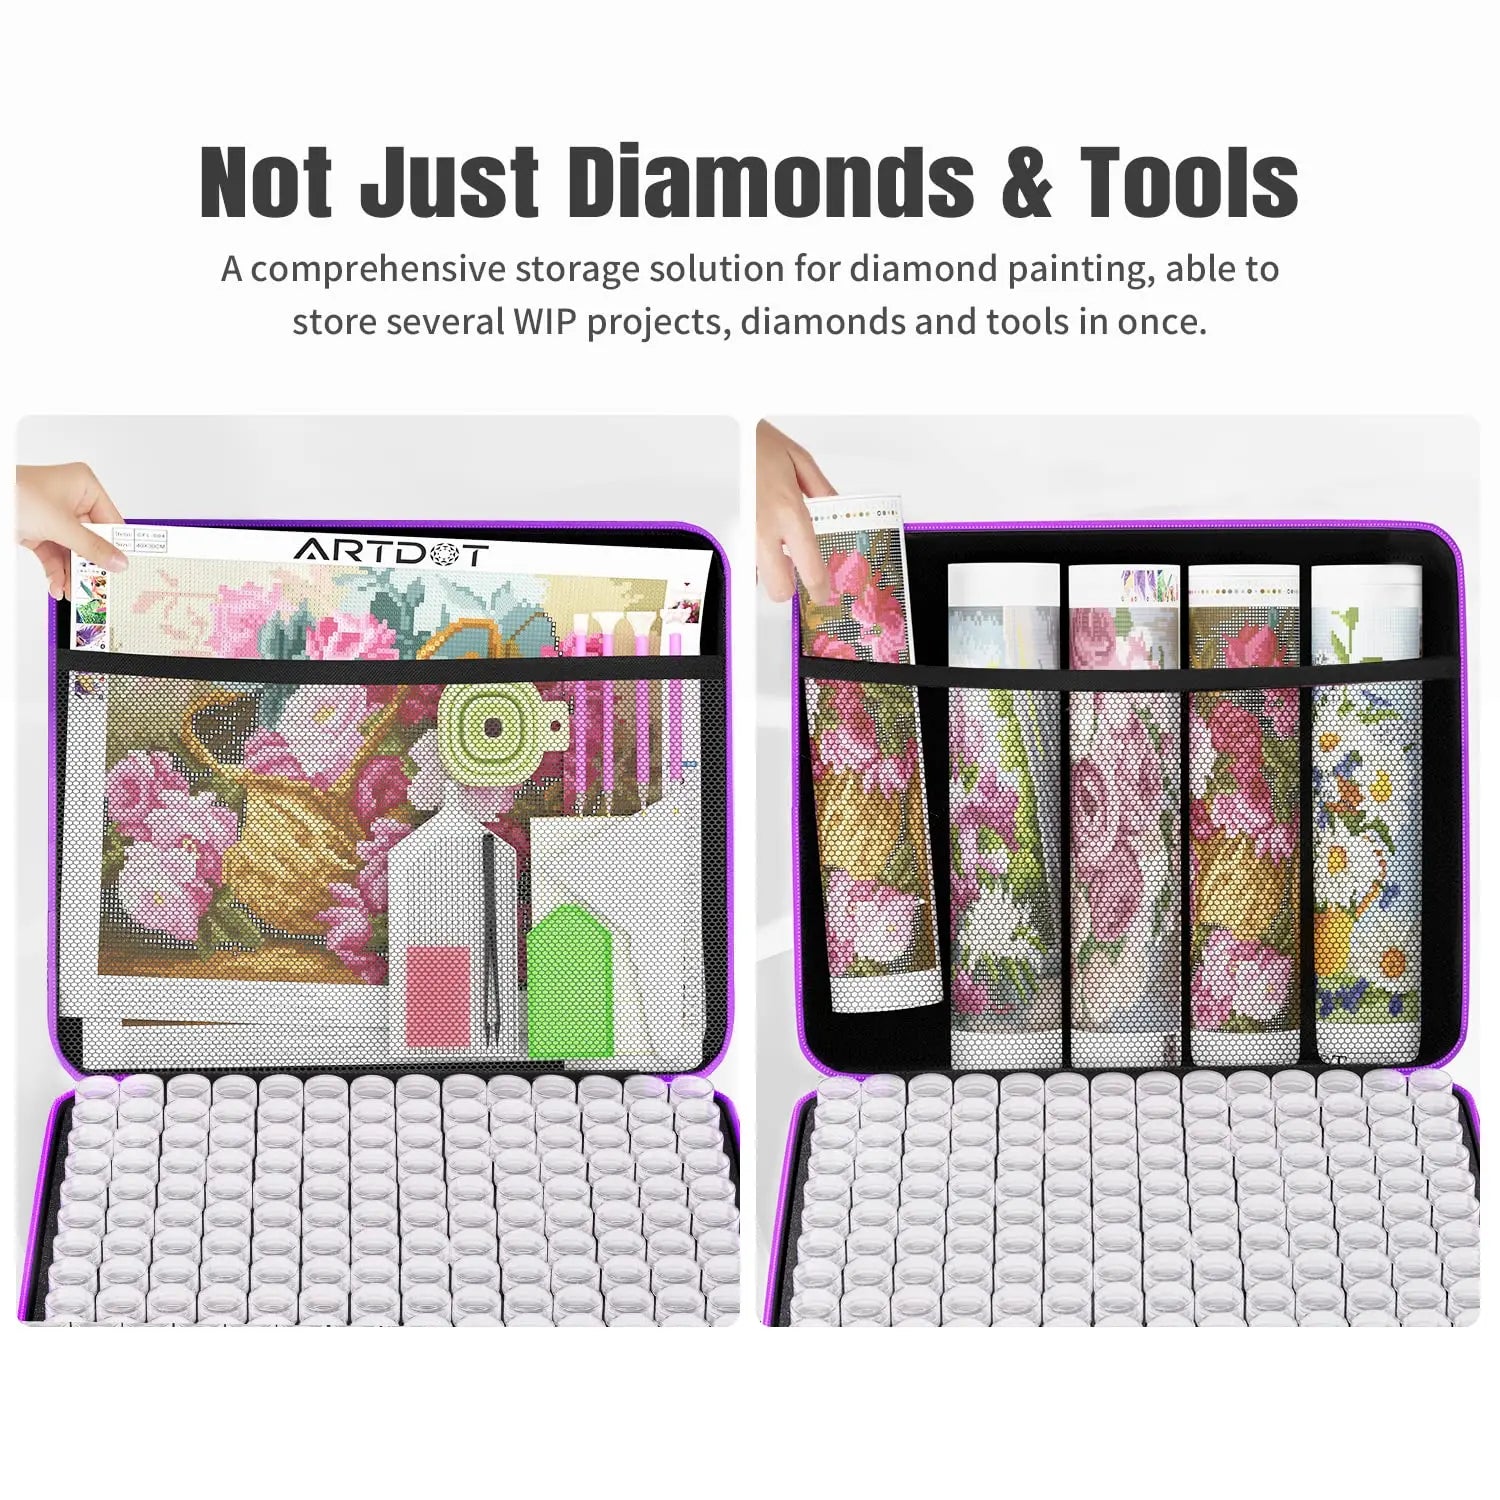 ARTDOT Storage Containers for Diamond Painting Accessories, 2 Drawers with 96 Slots Bead Storage Bottles and Diamond Art Storage Rack for Unisex Adult